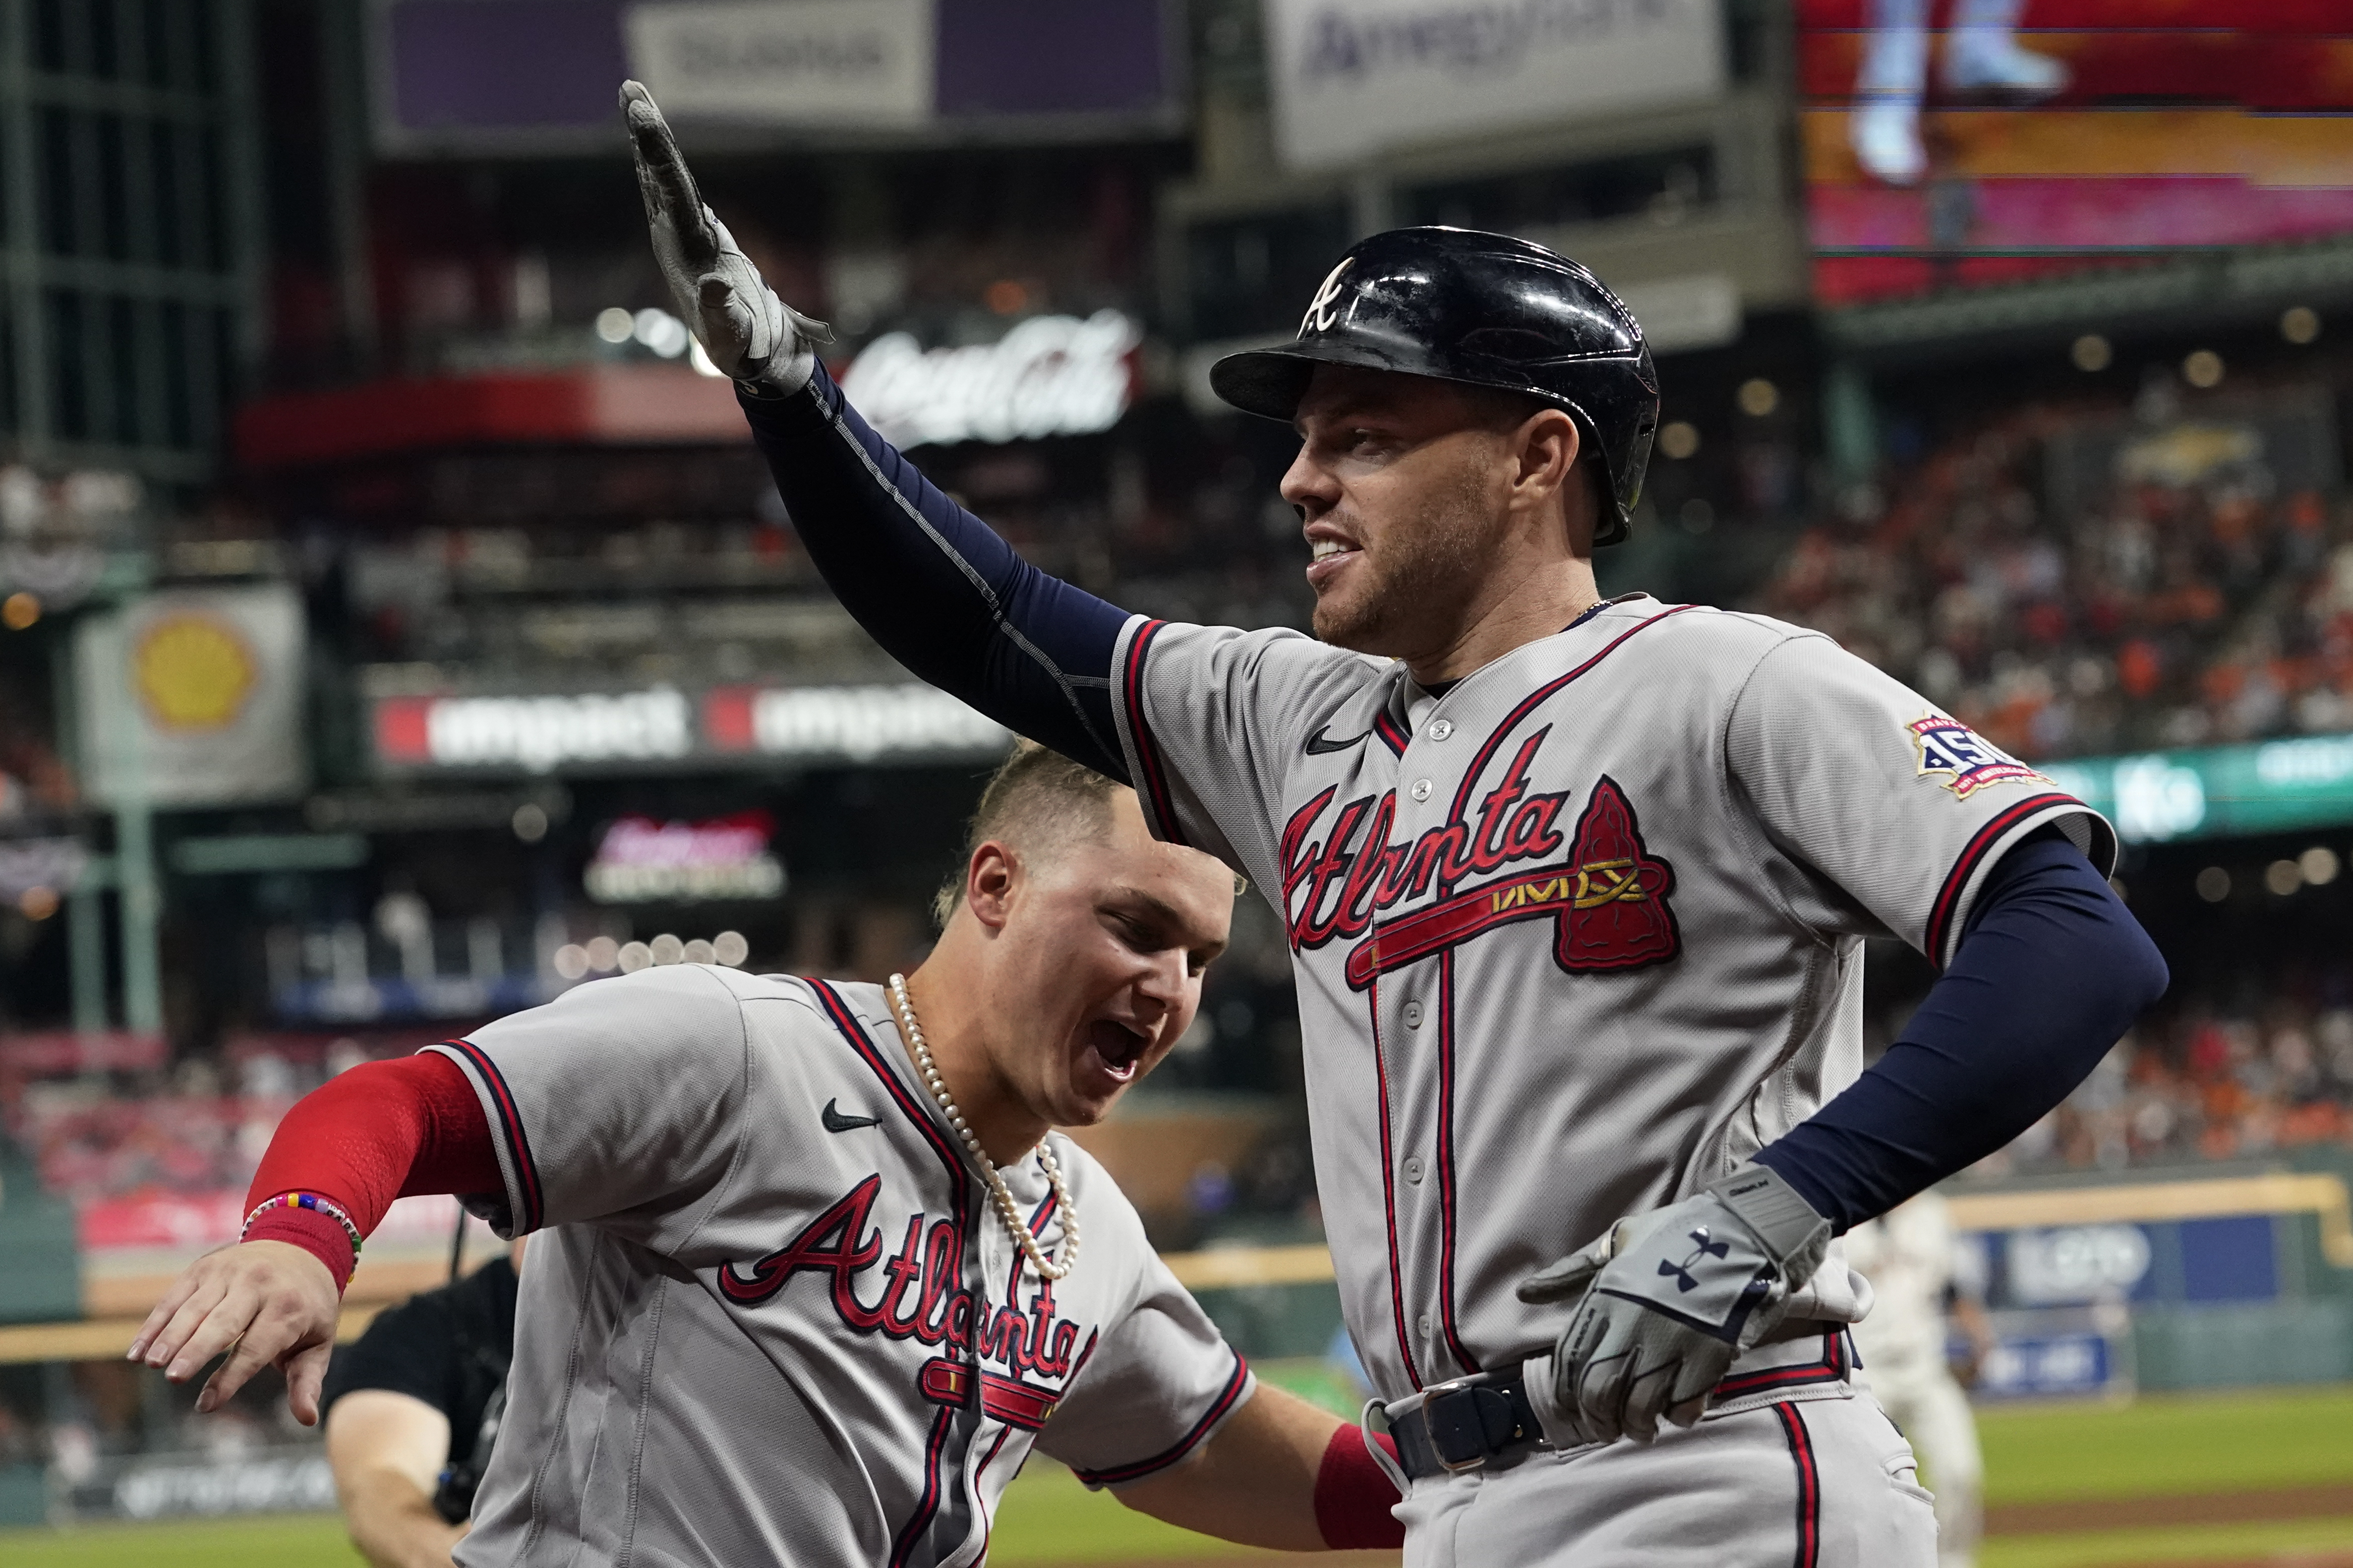 Atlanta Braves win their first World Series since 1995